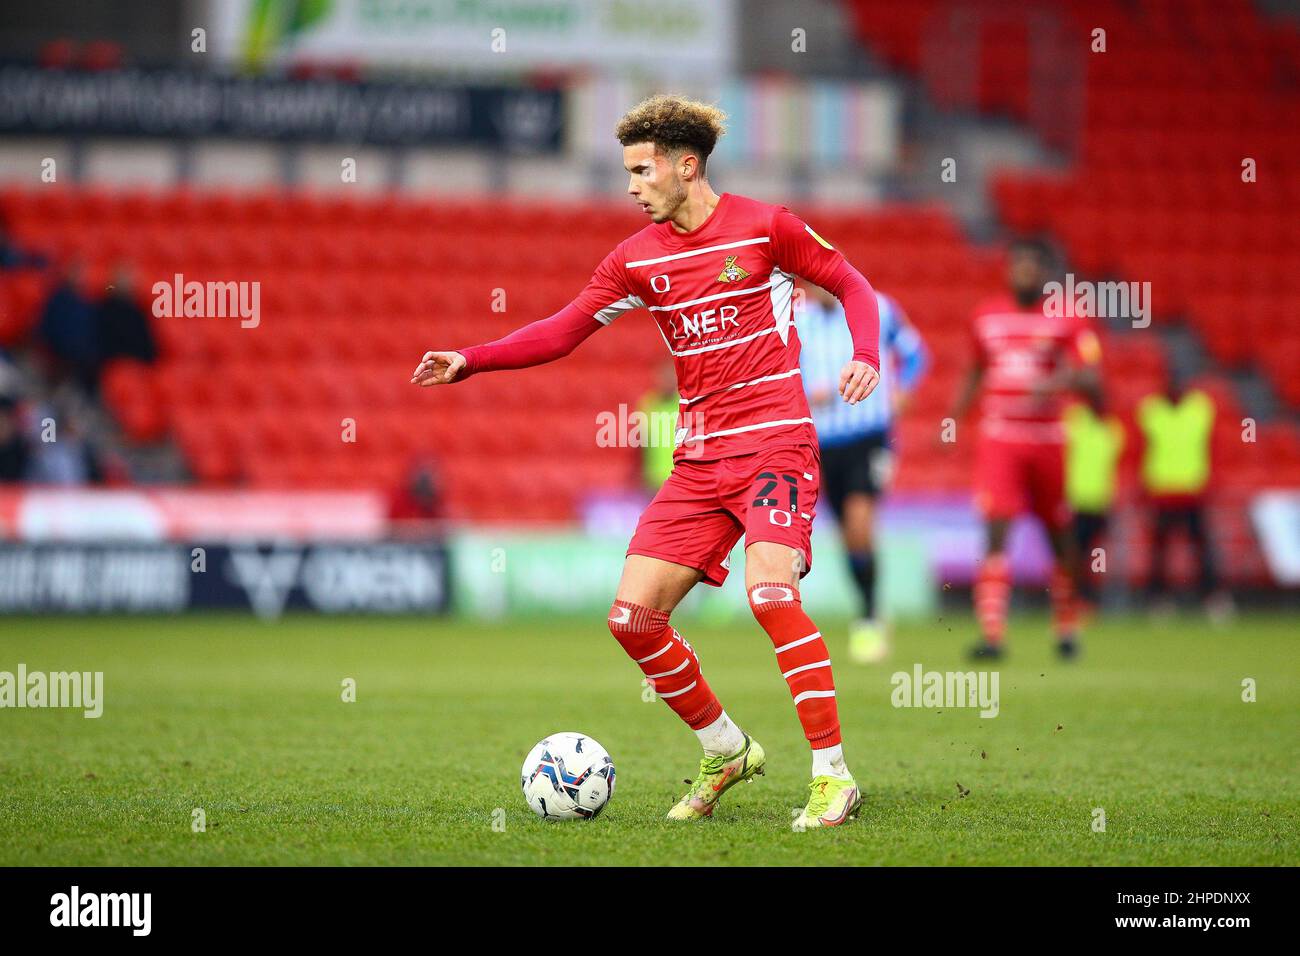 Eco-Power  Stadium Doncaster, England - 19th February 2022  Josh Martin (21) of Doncaster - during the game Doncaster v Sheffield Wednesday, EFL League One 2021/22 at the Eco-Power  Stadium Doncaster, England - 19th February 2022  Credit: Arthur Haigh/WhiteRosePhotos/Alamy Live News Stock Photo